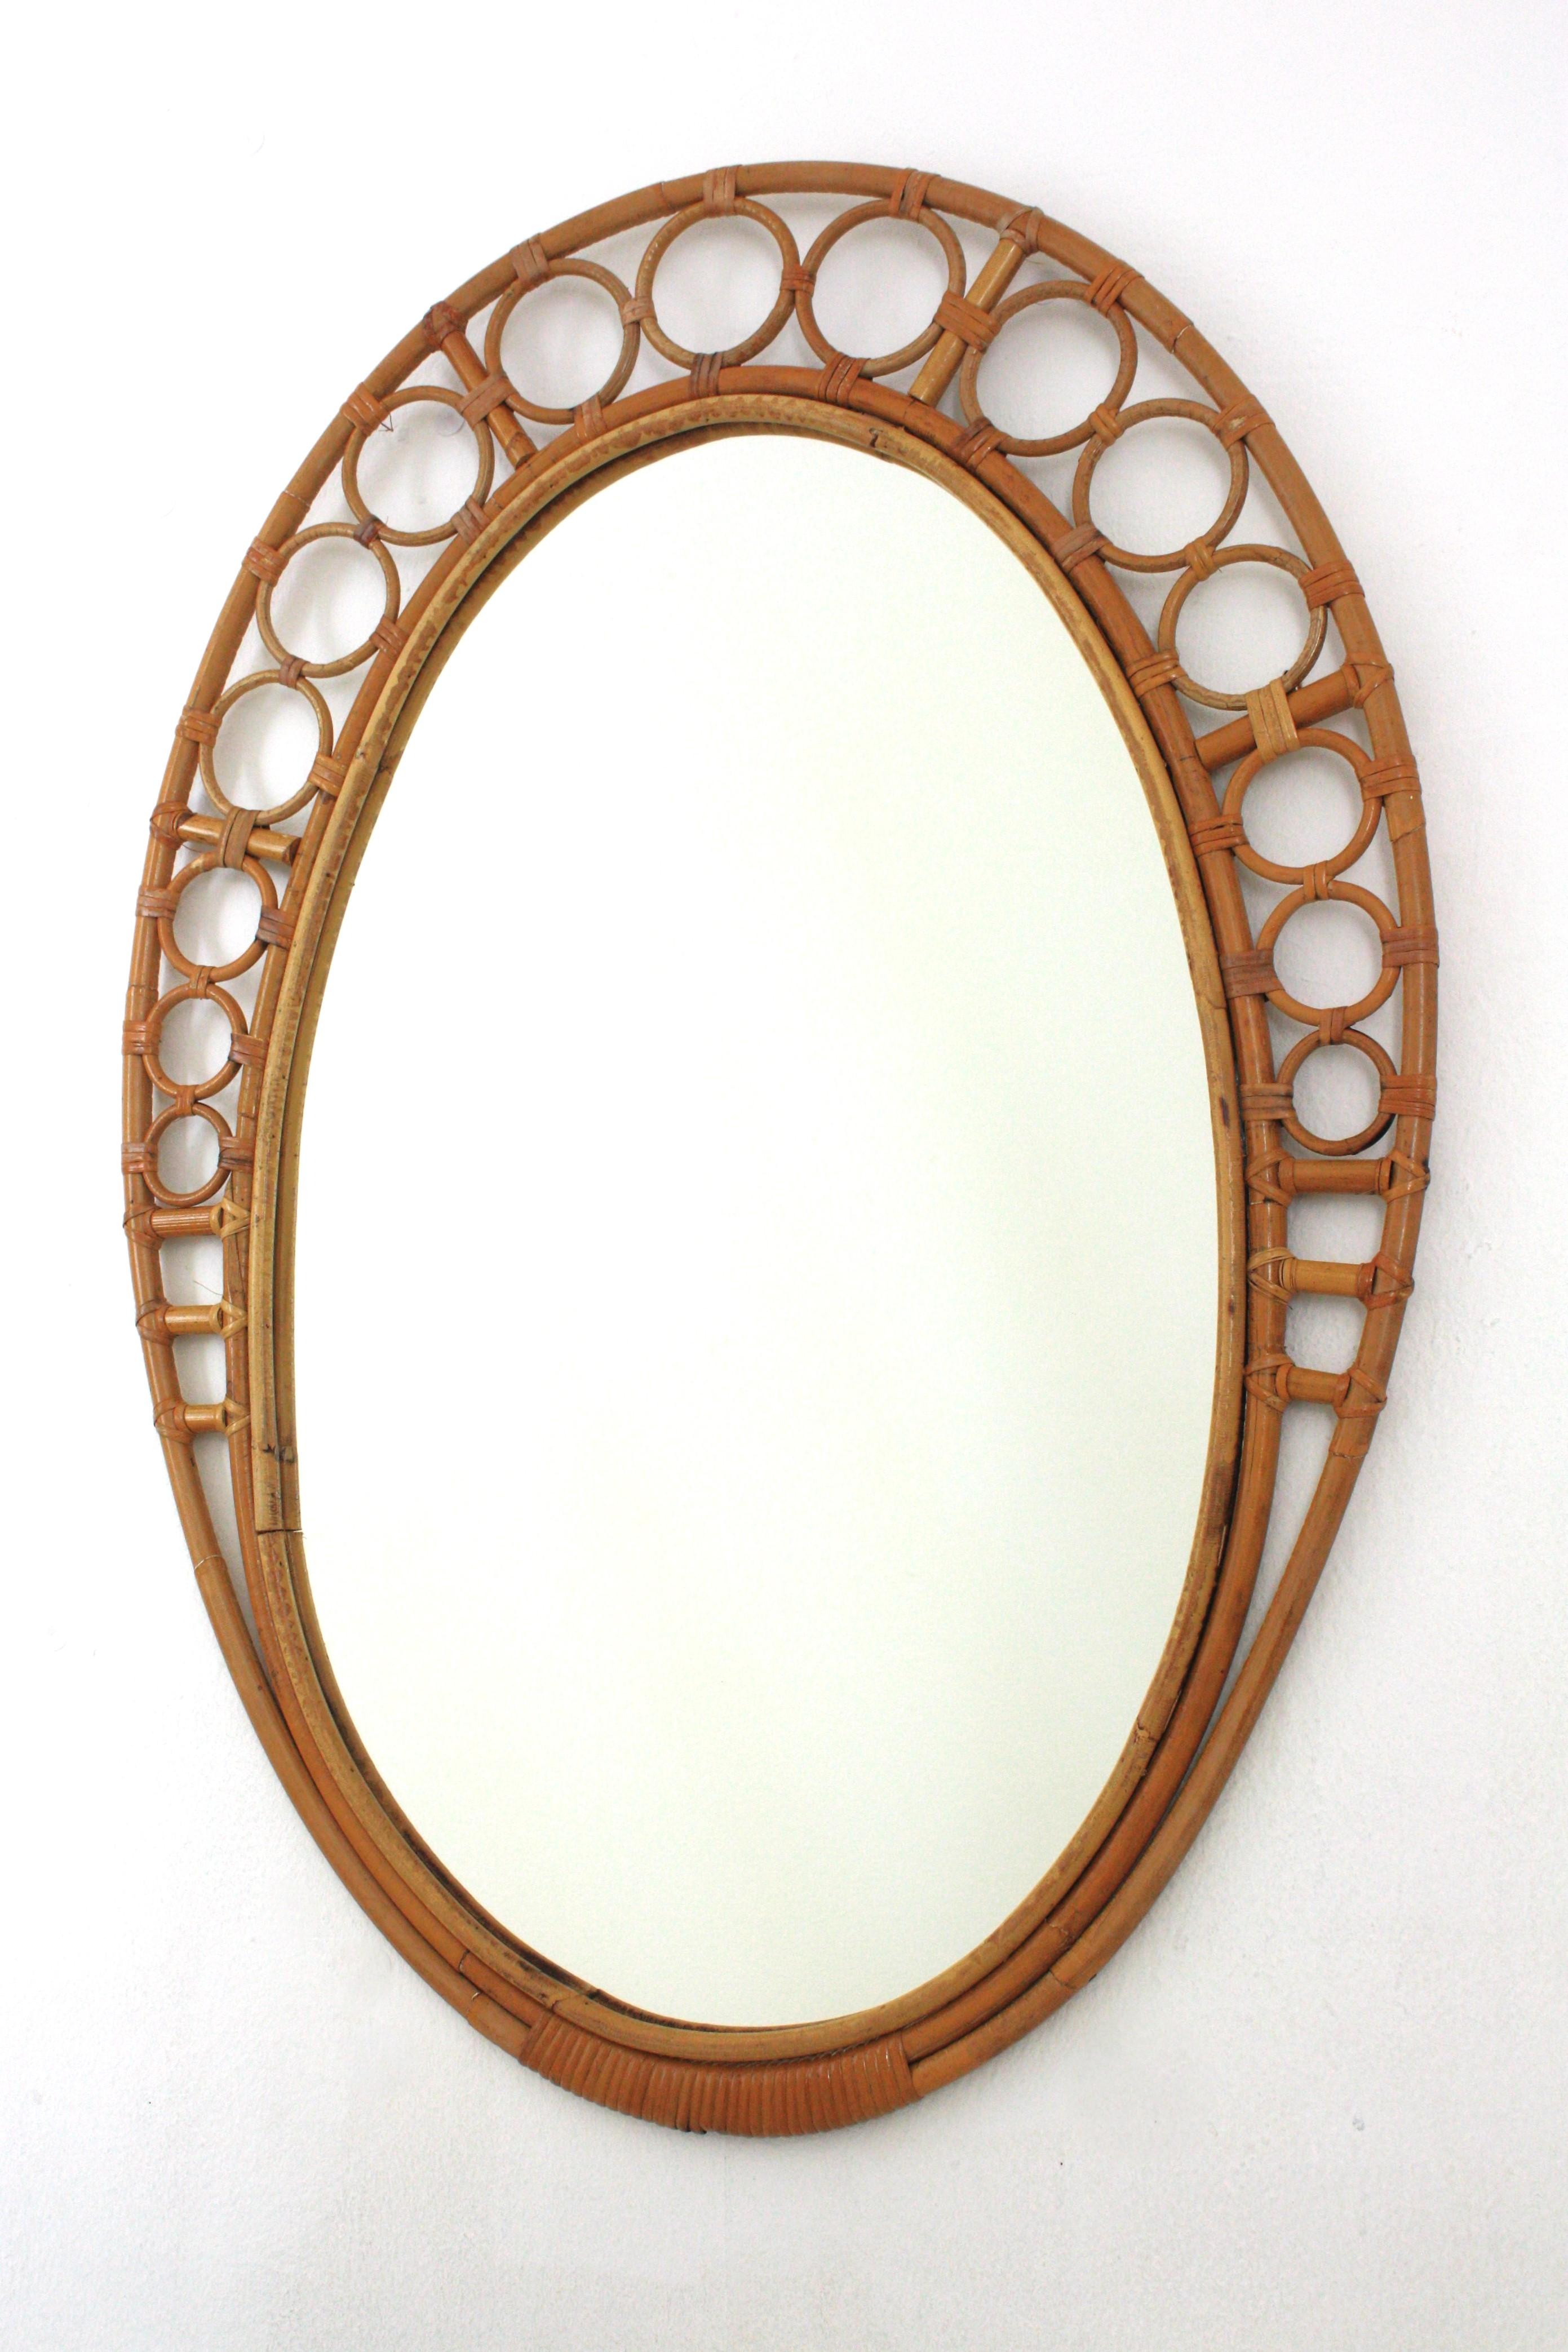 Hand-Crafted Bamboo Rattan Oval Mirror with Rings Frame, 1960s For Sale